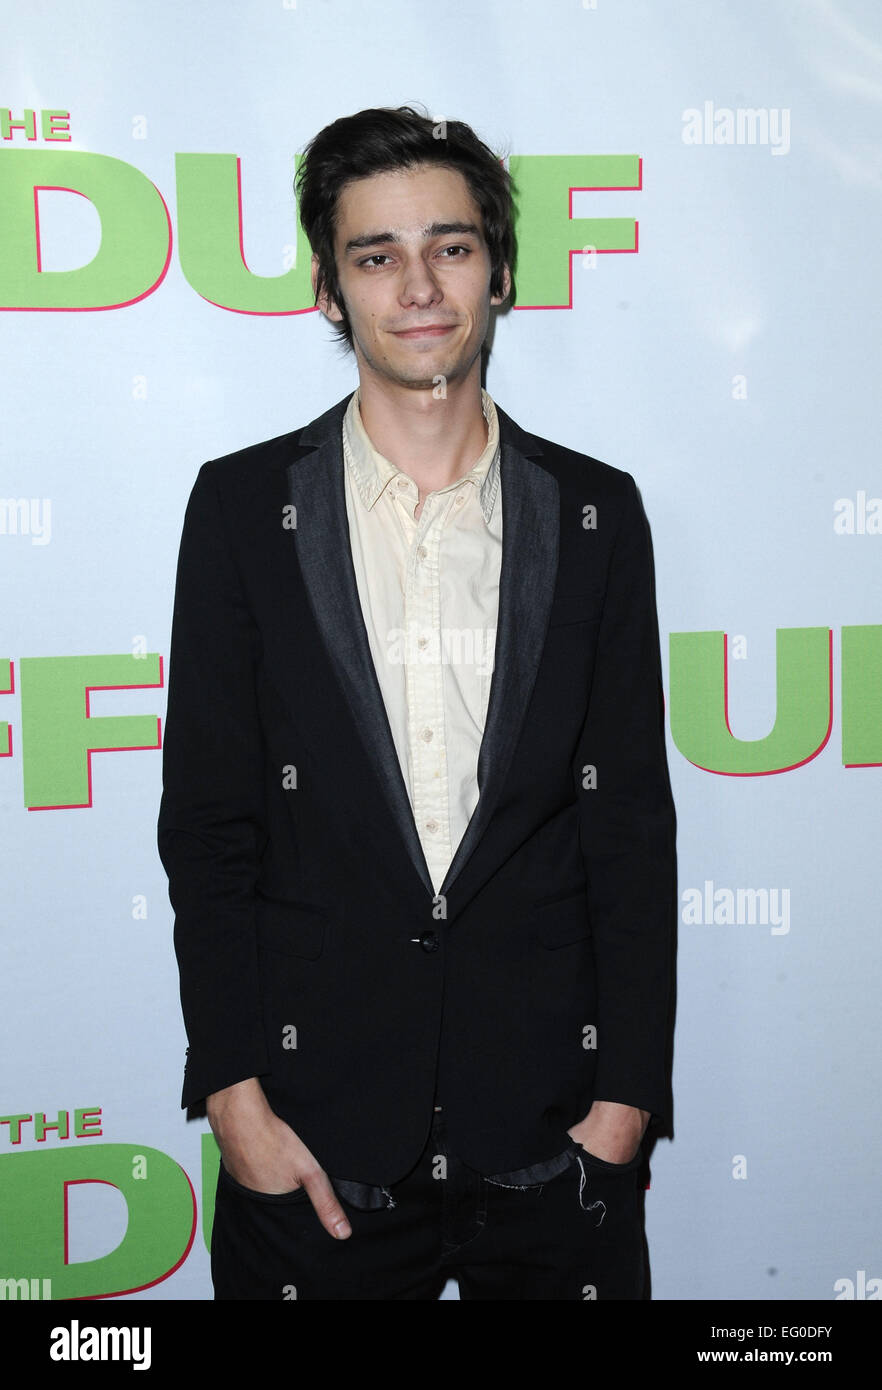 Los Angeles, California, USA. 12th Feb, 2015. Devin Bostick attending the Los Angeles Screening of ''The Duff'' held at the TCL Chinese 6 Theatres in Hollywood, California on February 12, 2015. 2015 Credit:  D. Long/Globe Photos/ZUMA Wire/Alamy Live News Stock Photo